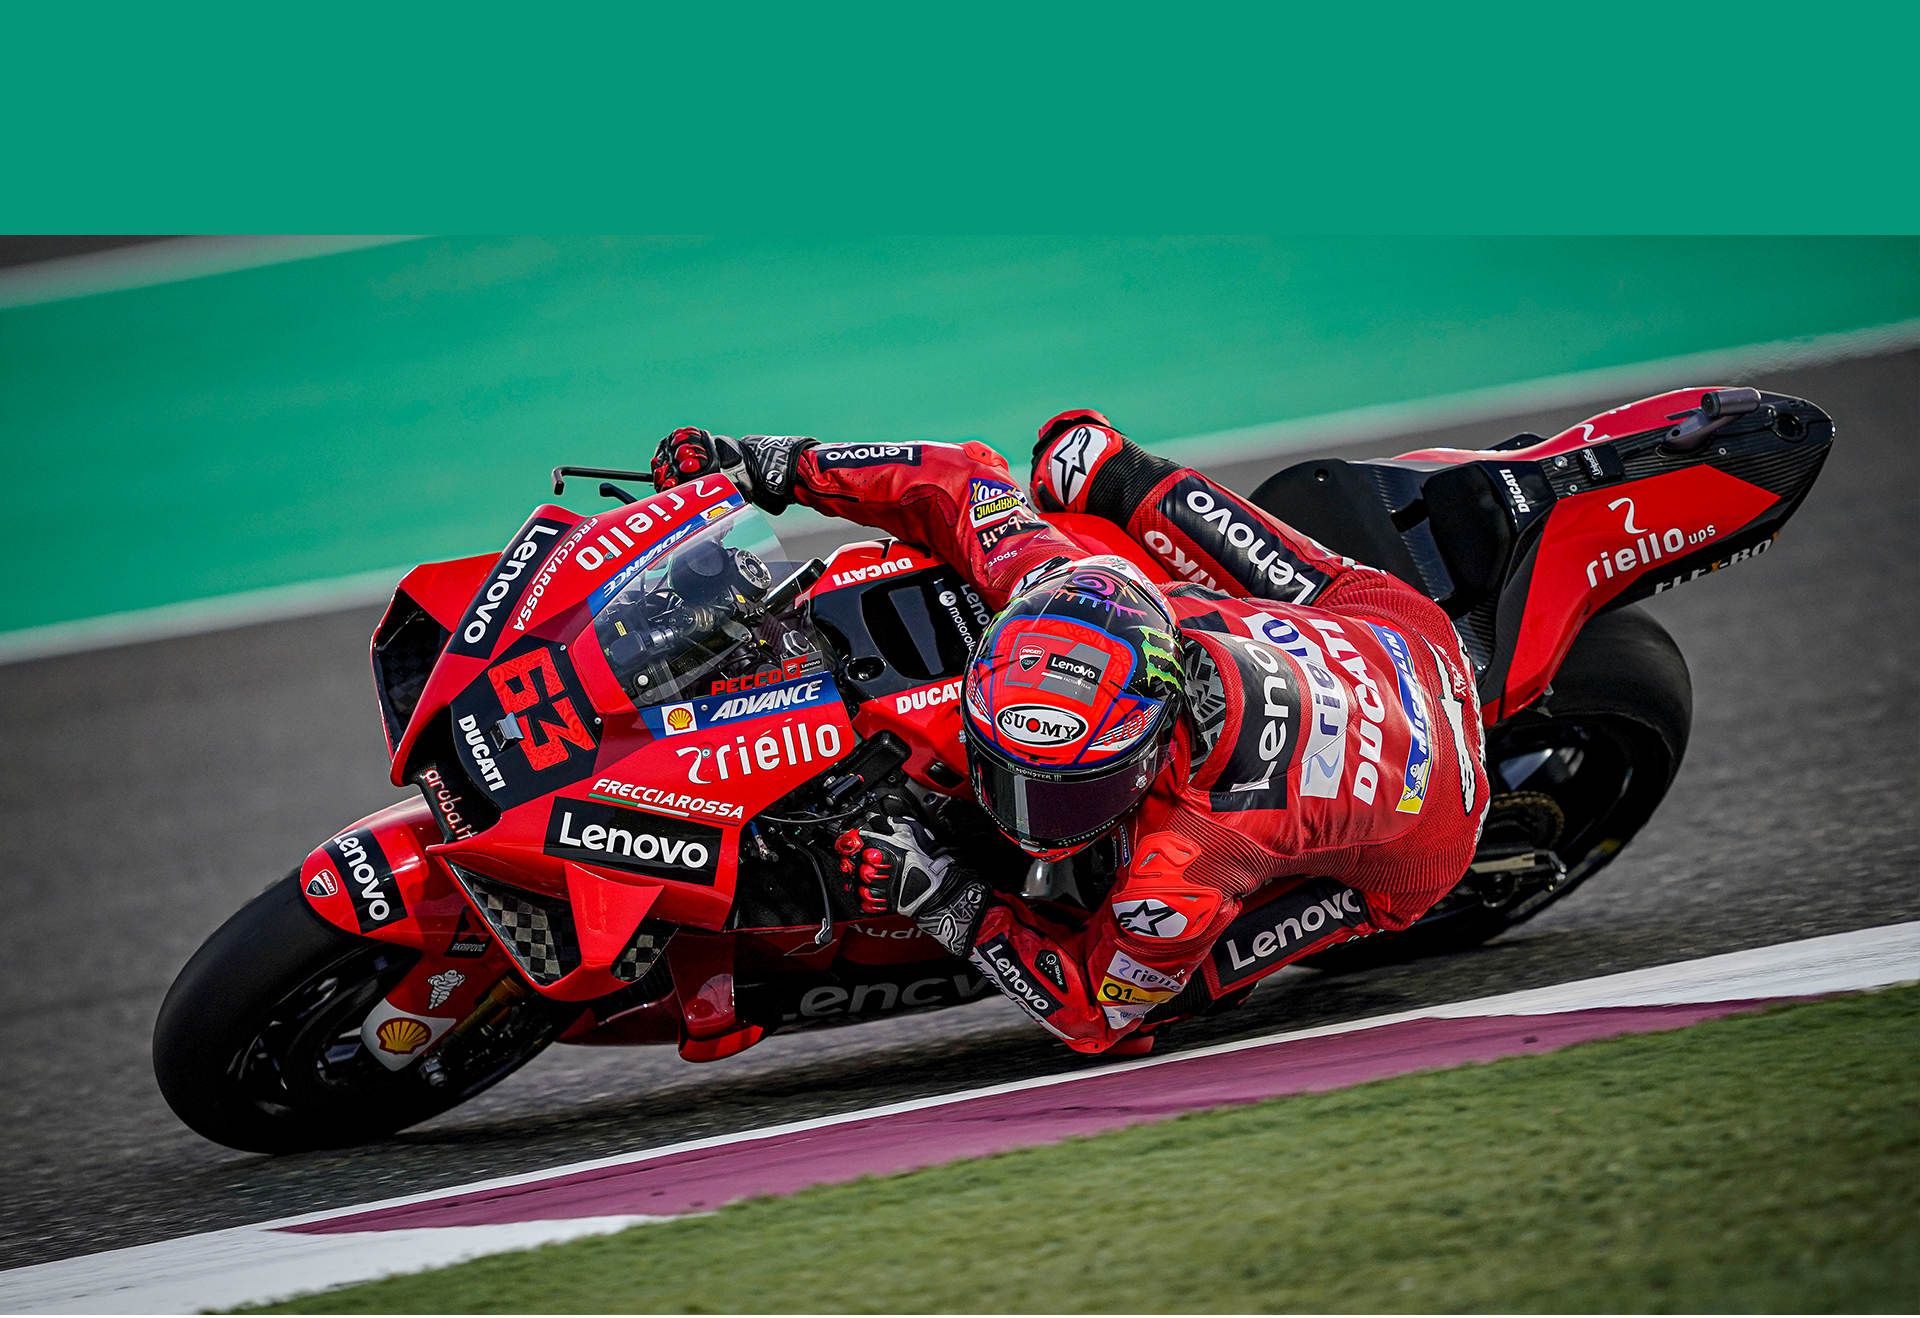 Qatar MotoGP Qualifying Results. MotorcycleDaily.com News, Editorials, Product Reviews and Bike Reviews